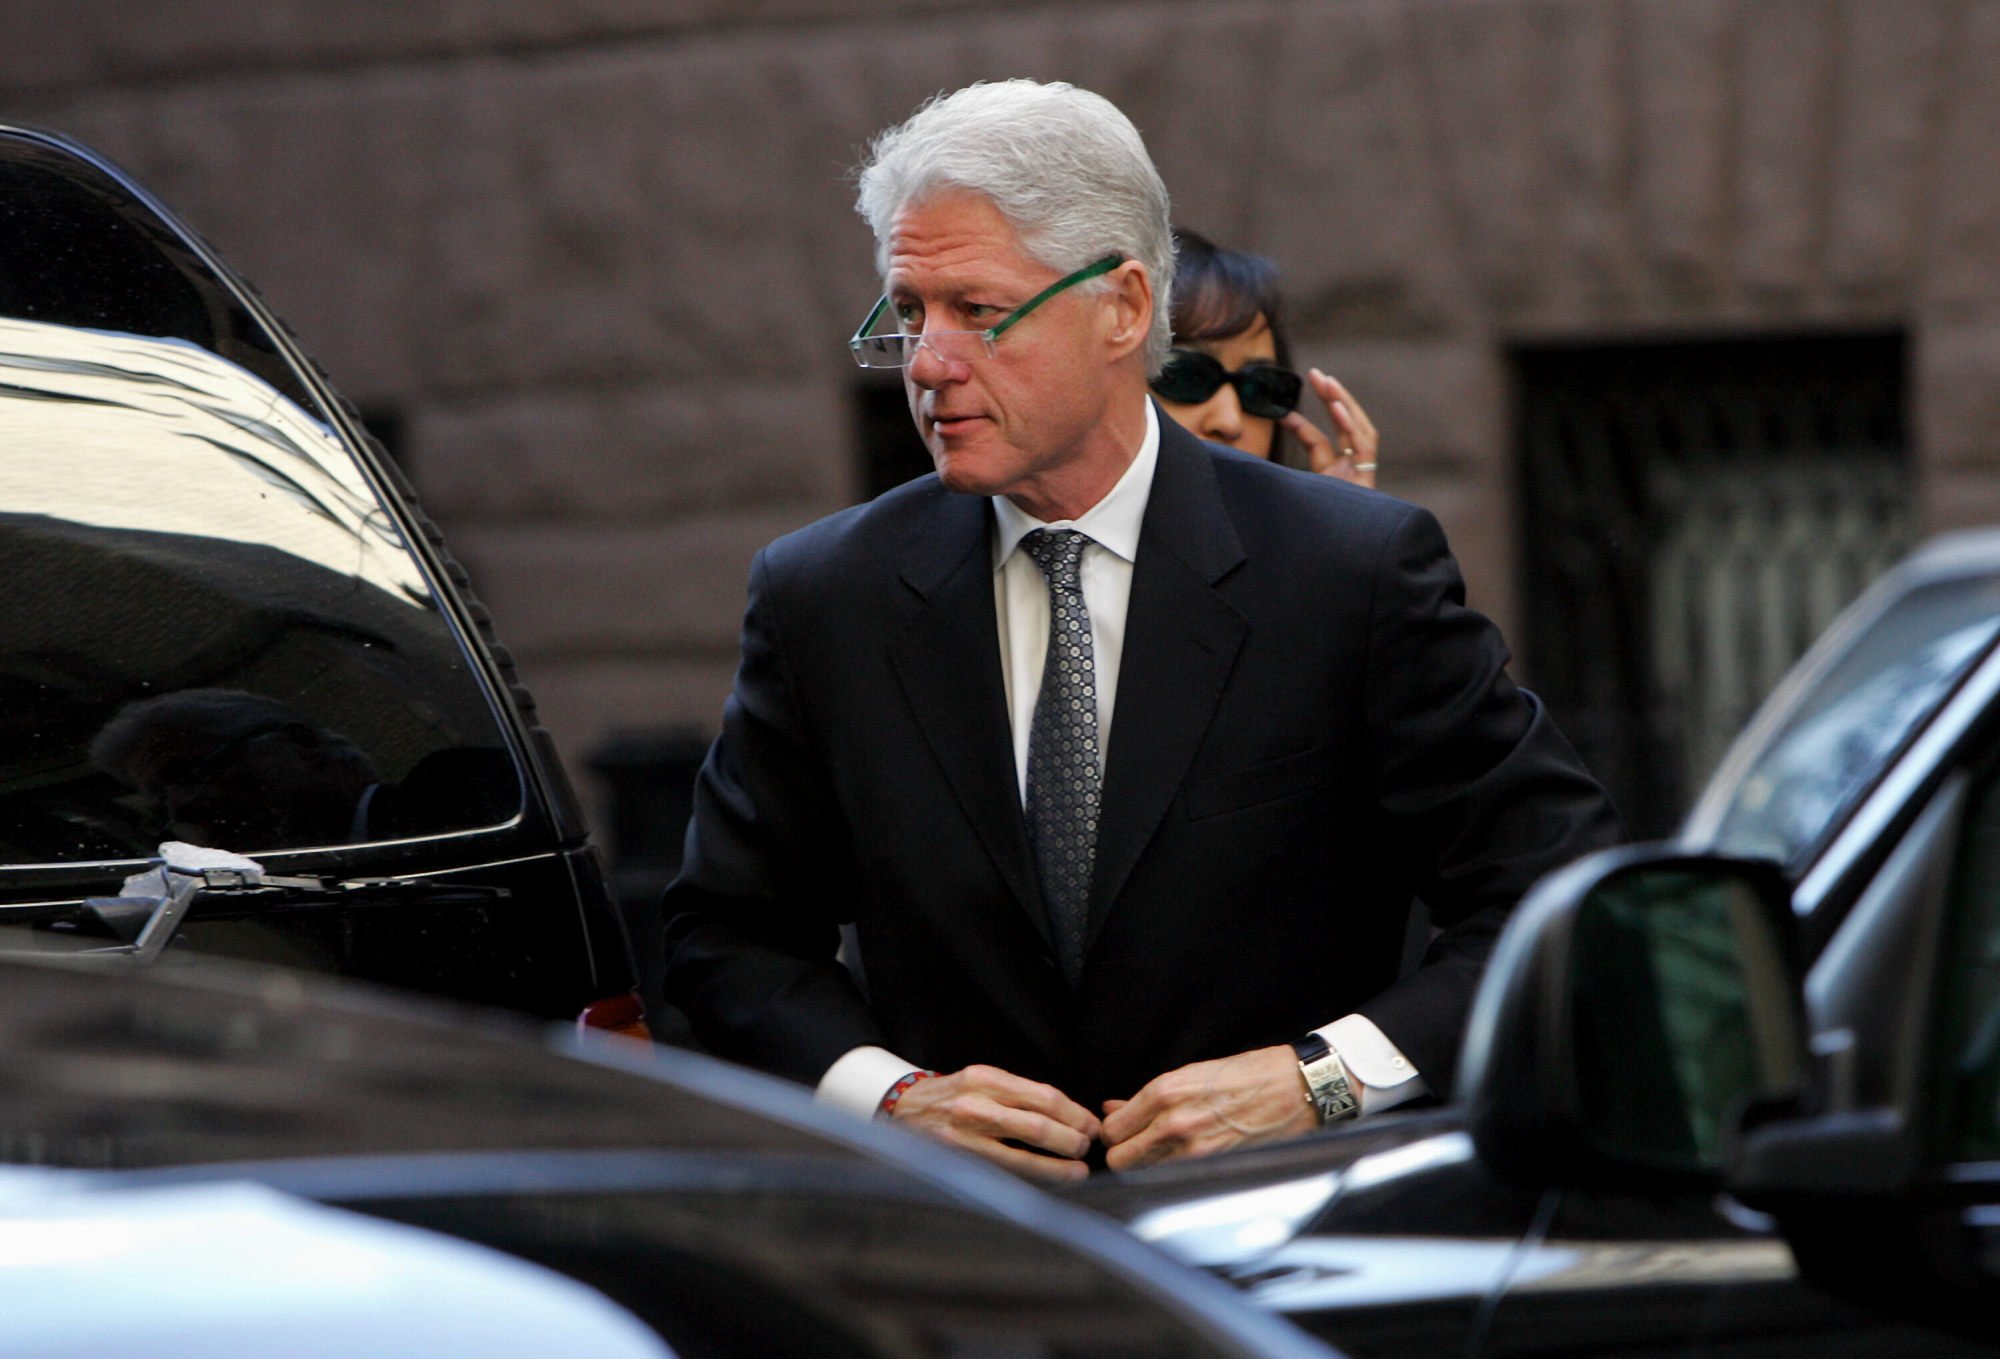 Former President Bill Clinton in 2006. Photo: Getty Images